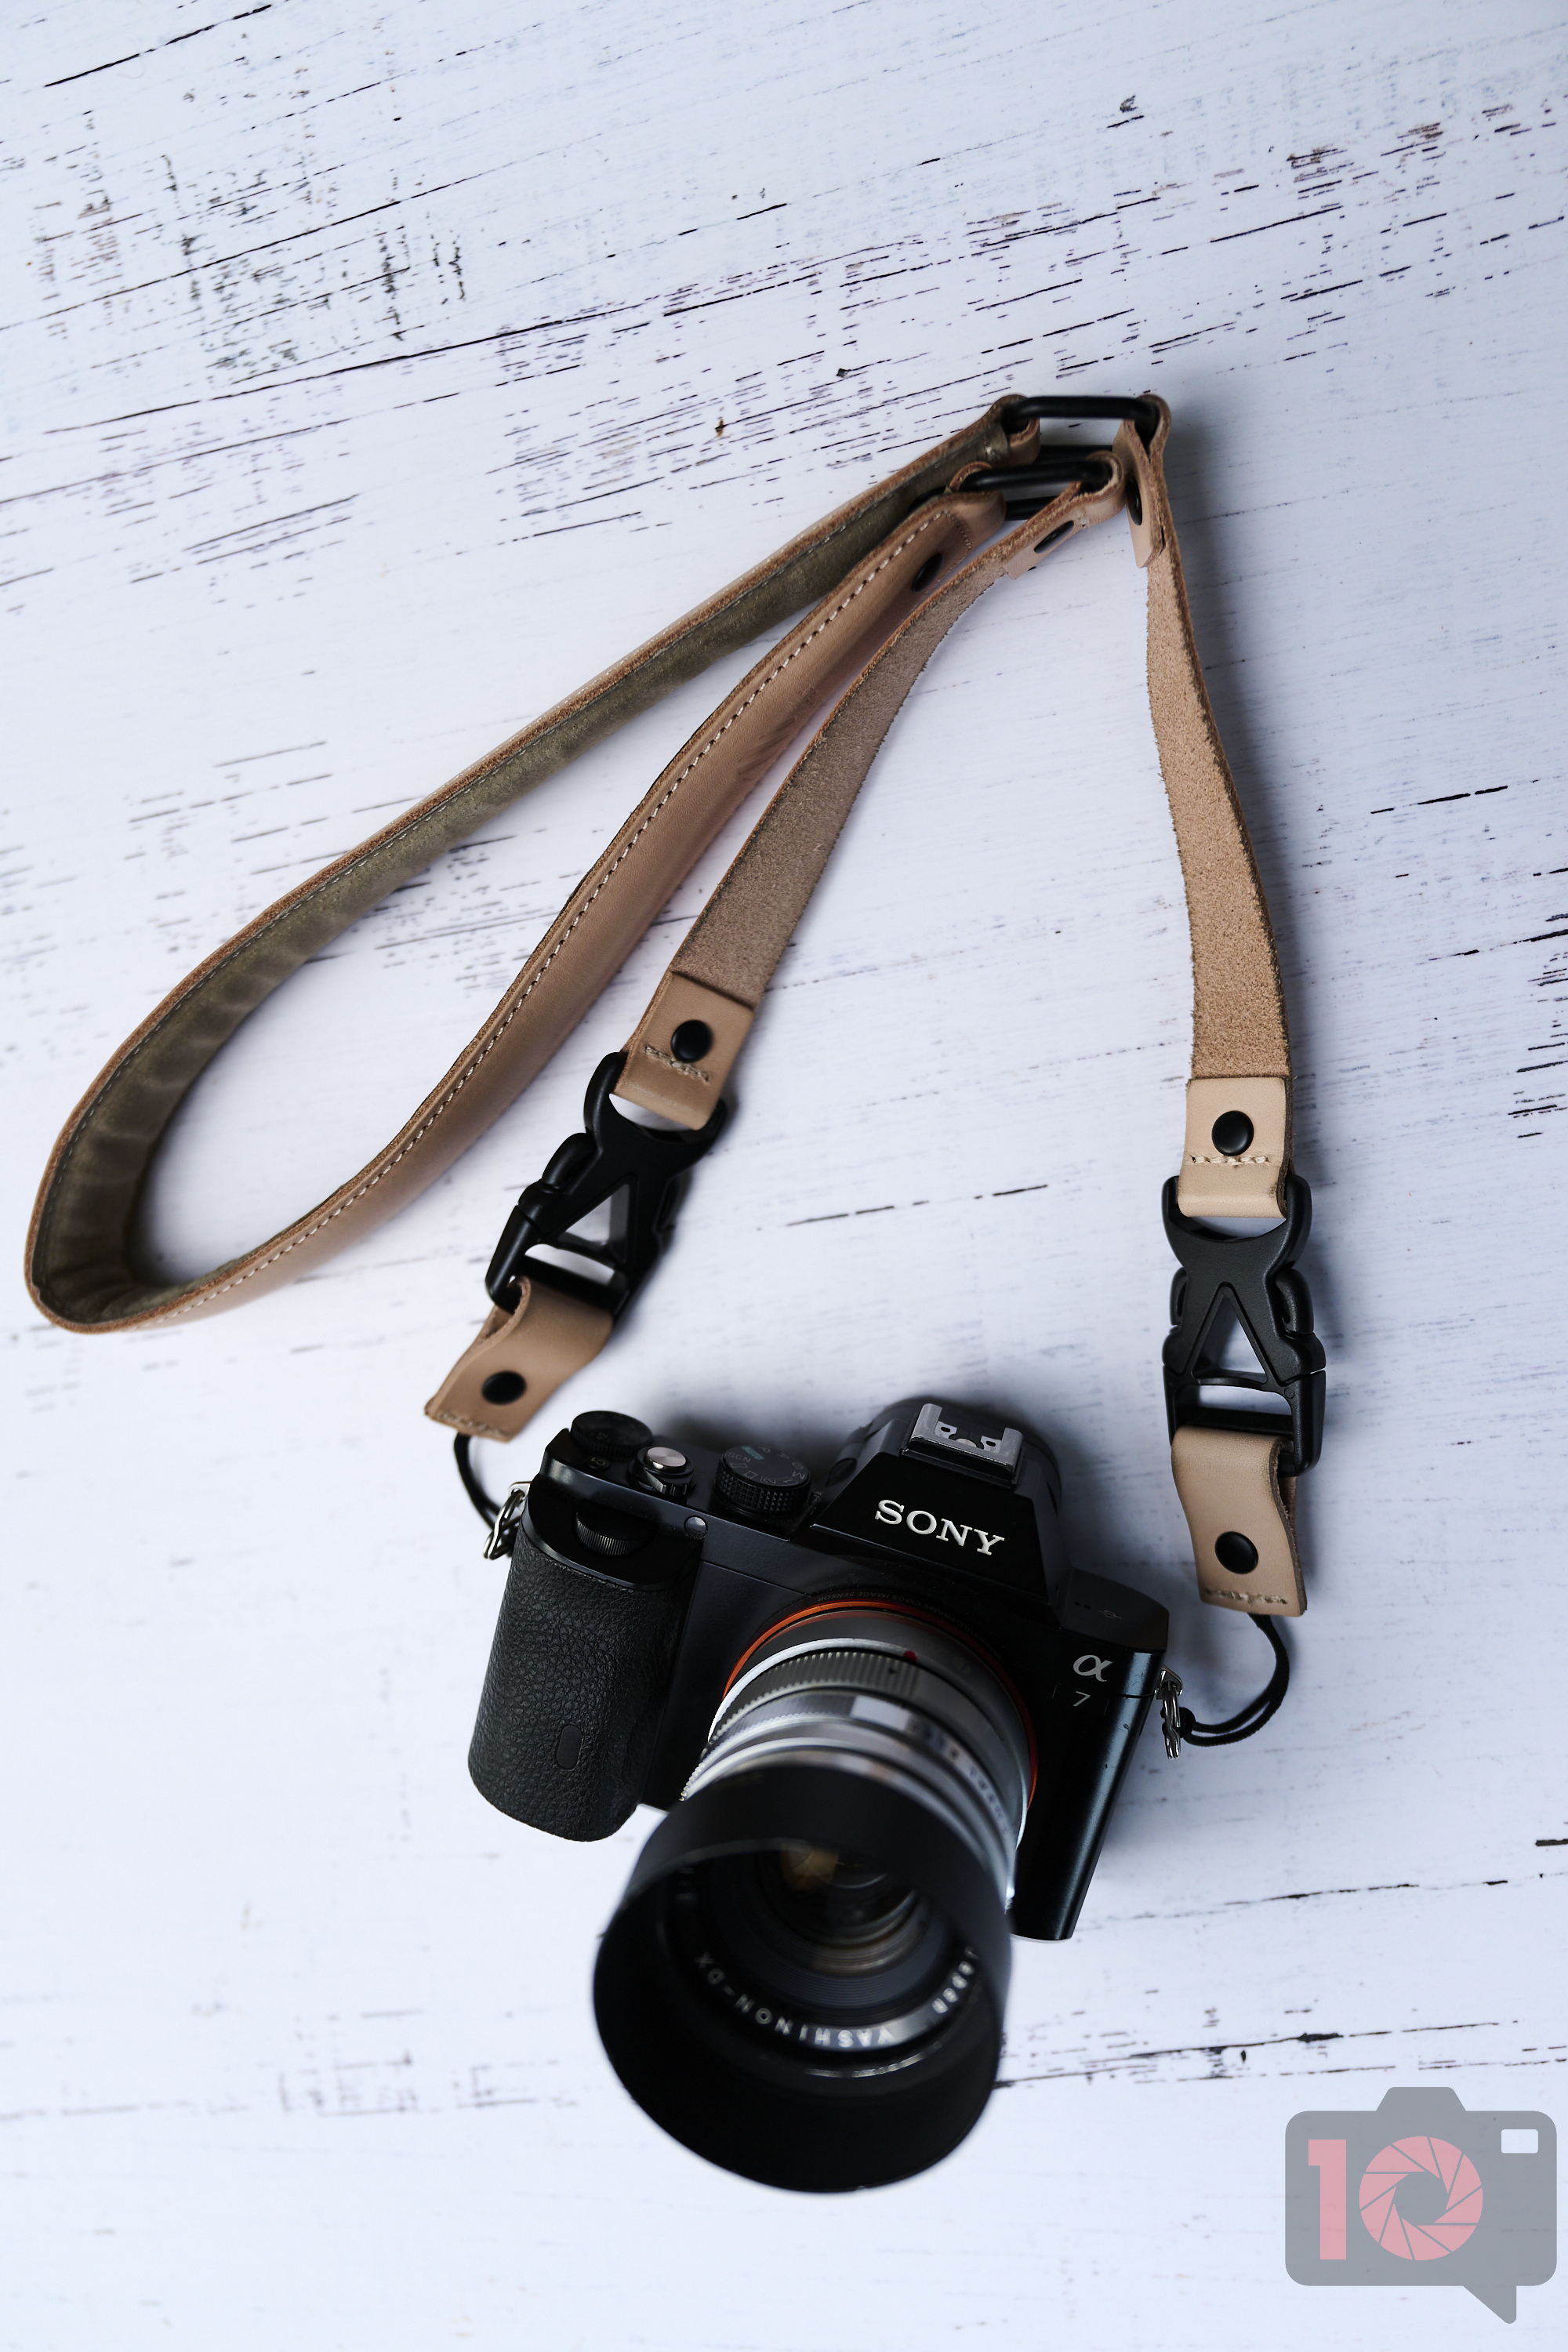 Chris Gampat The Phoblographer Langly Leather Camera Strap product images 2.81-125s400